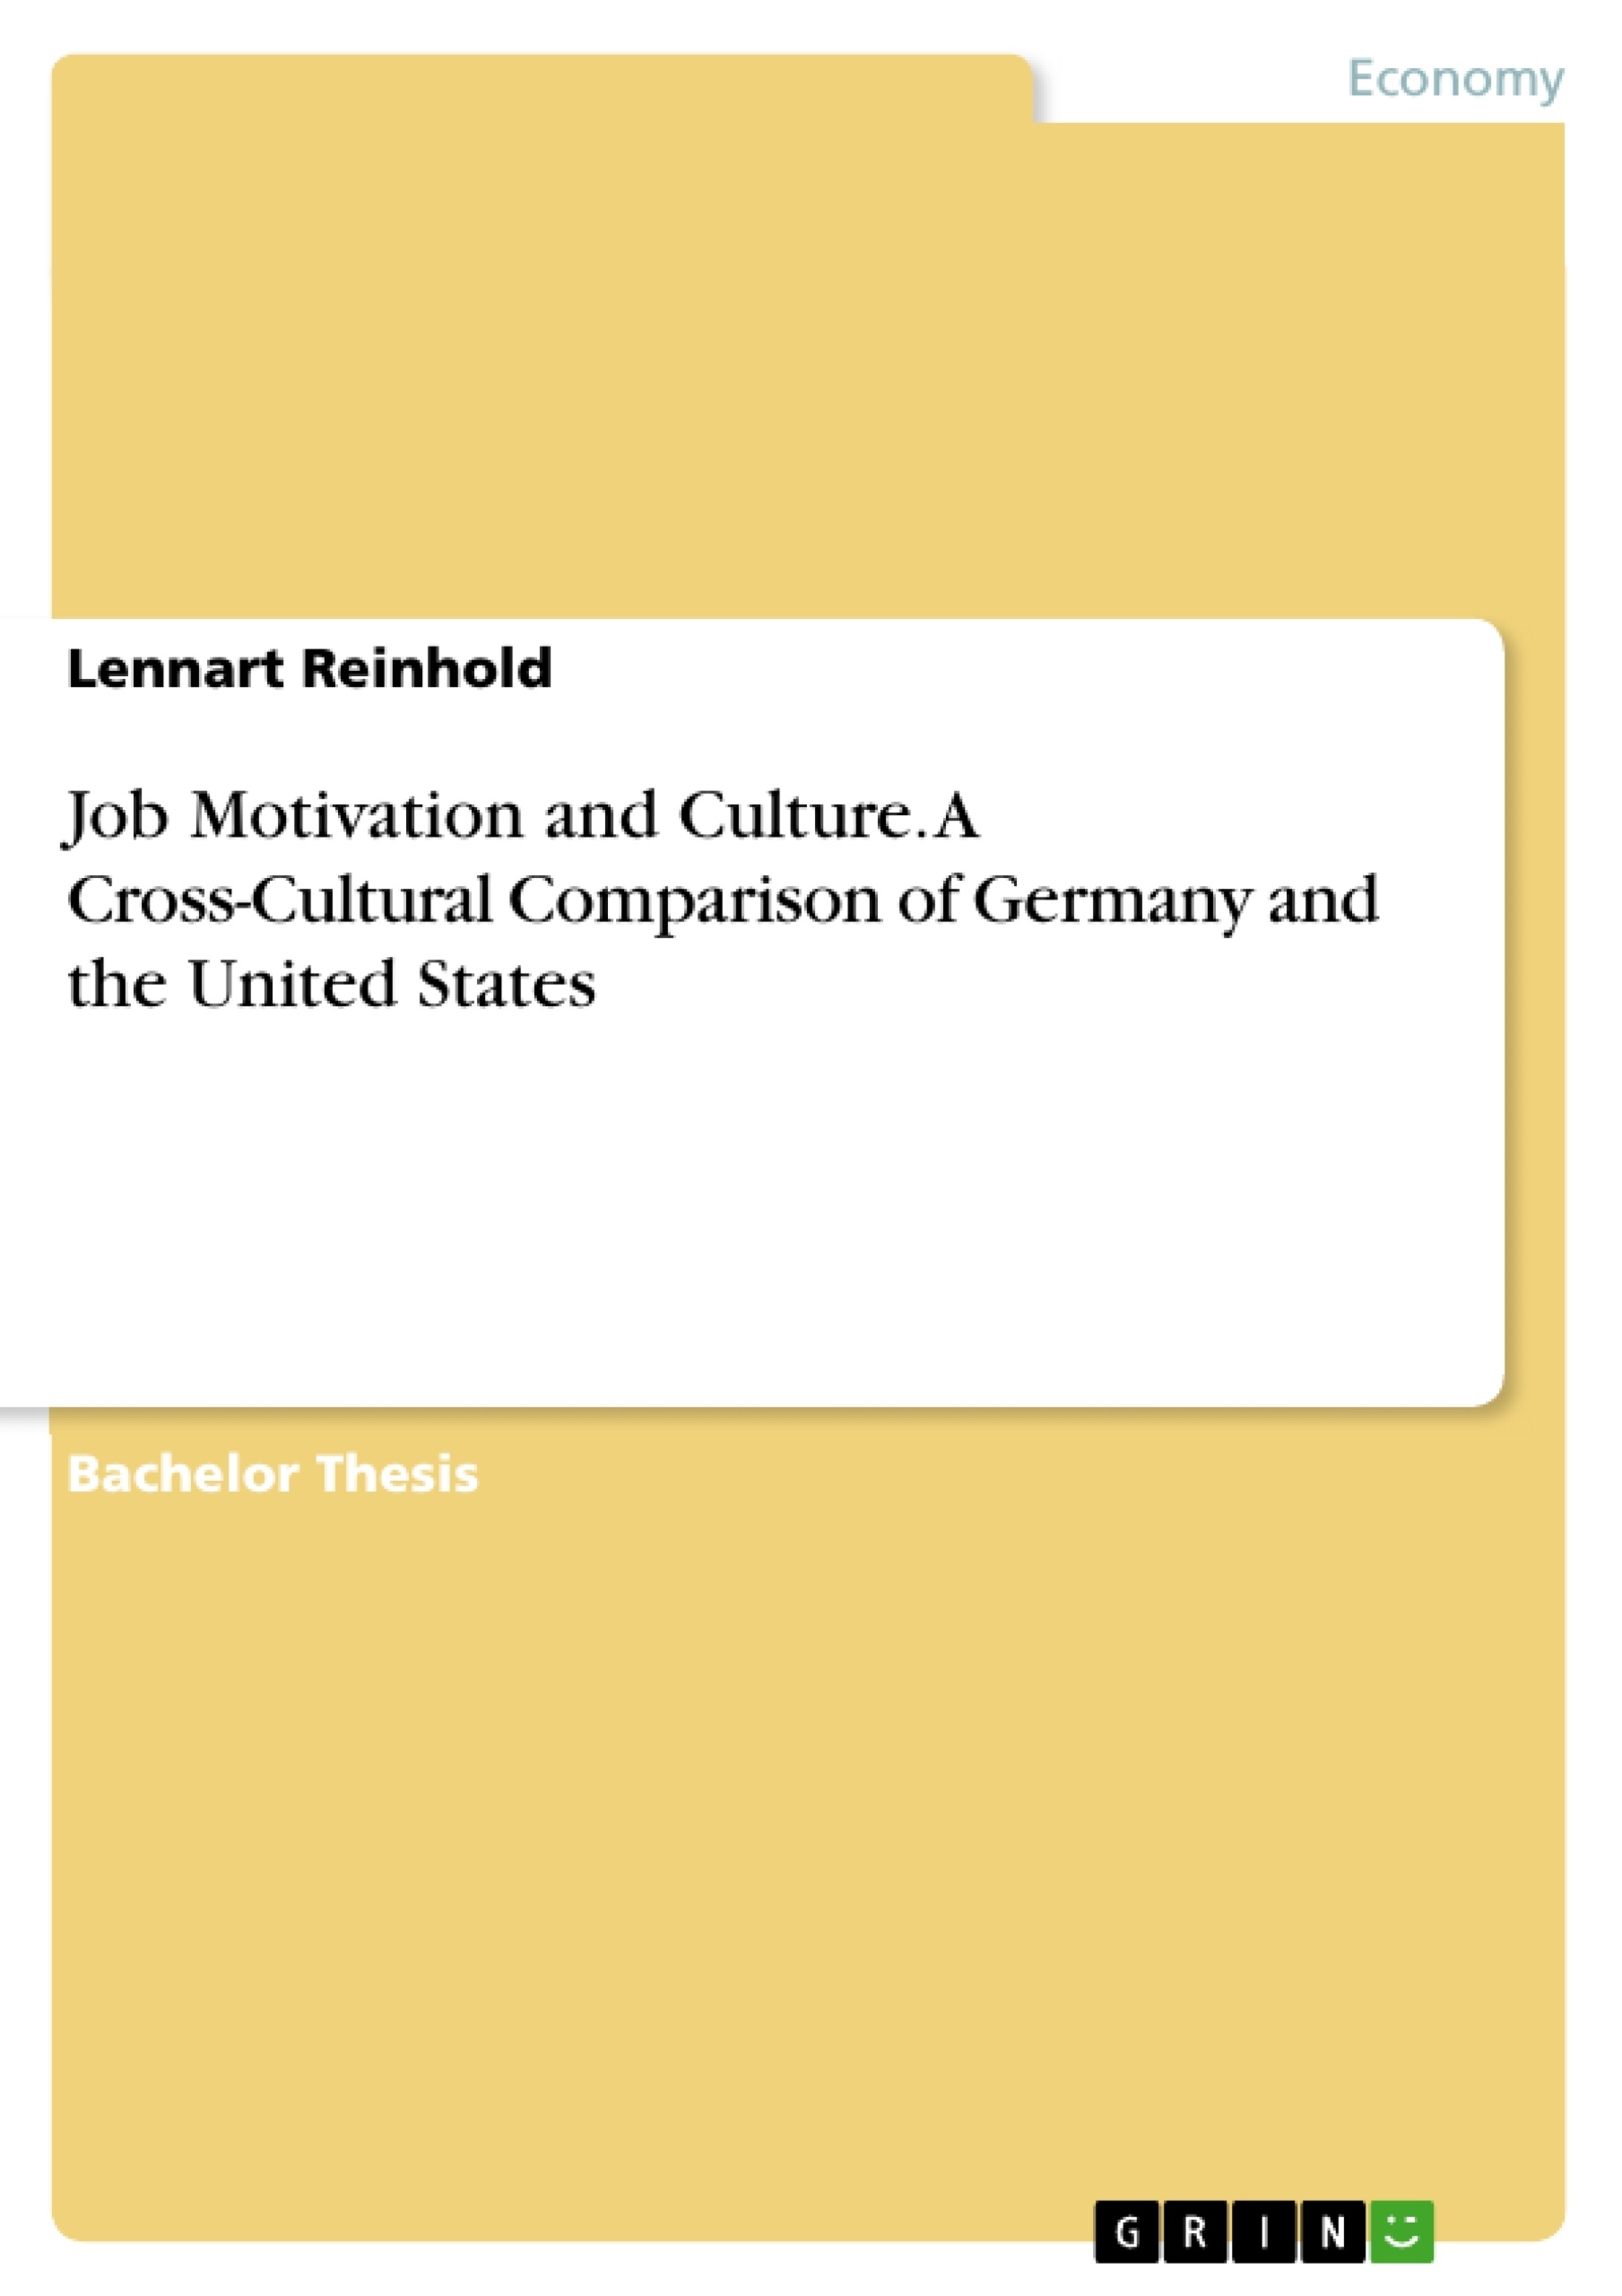 Title: Job Motivation and Culture. A Cross-Cultural Comparison of Germany and the United States